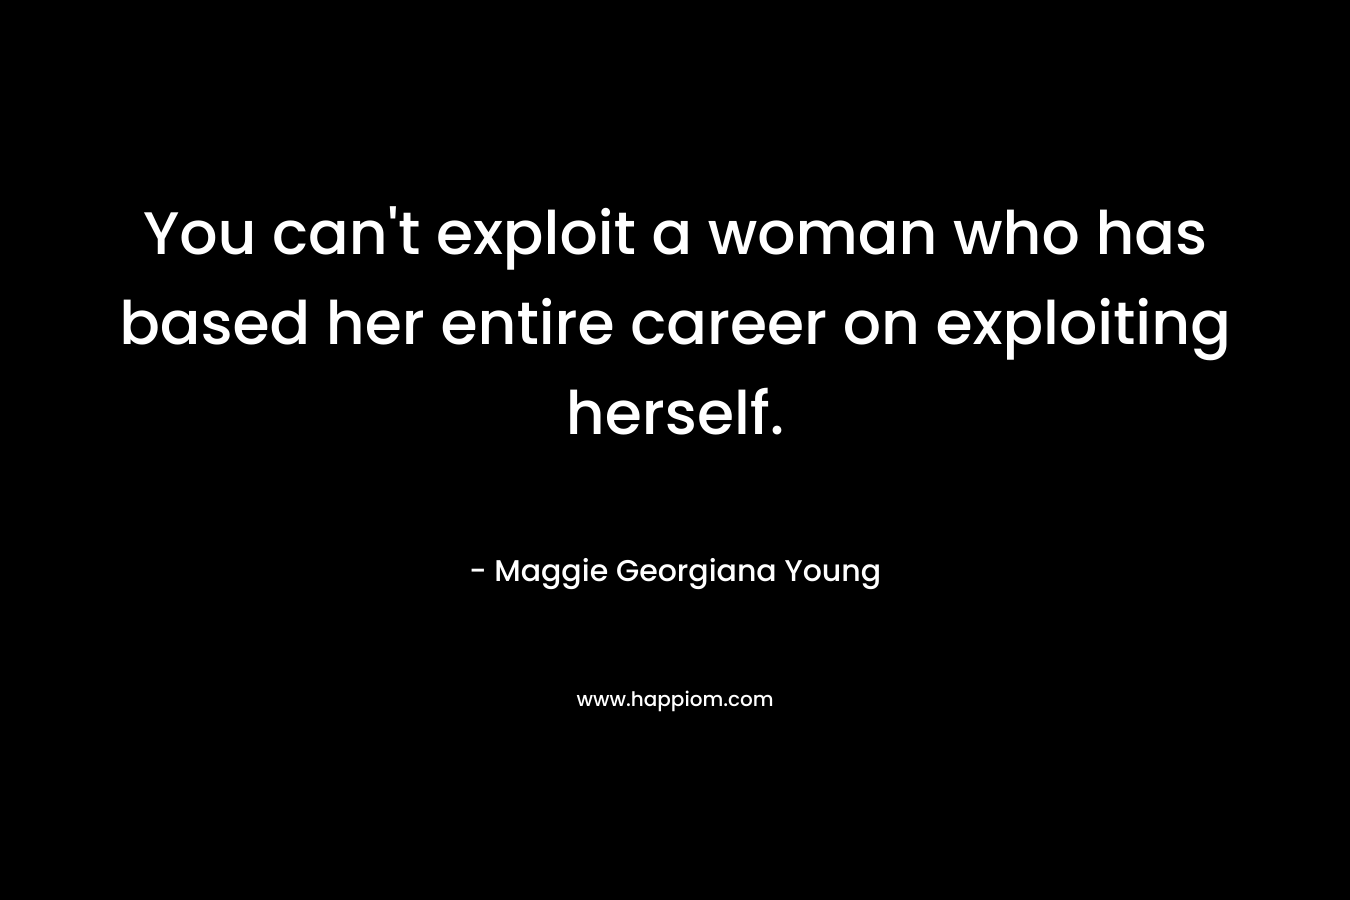 You can’t exploit a woman who has based her entire career on exploiting herself. – Maggie Georgiana Young